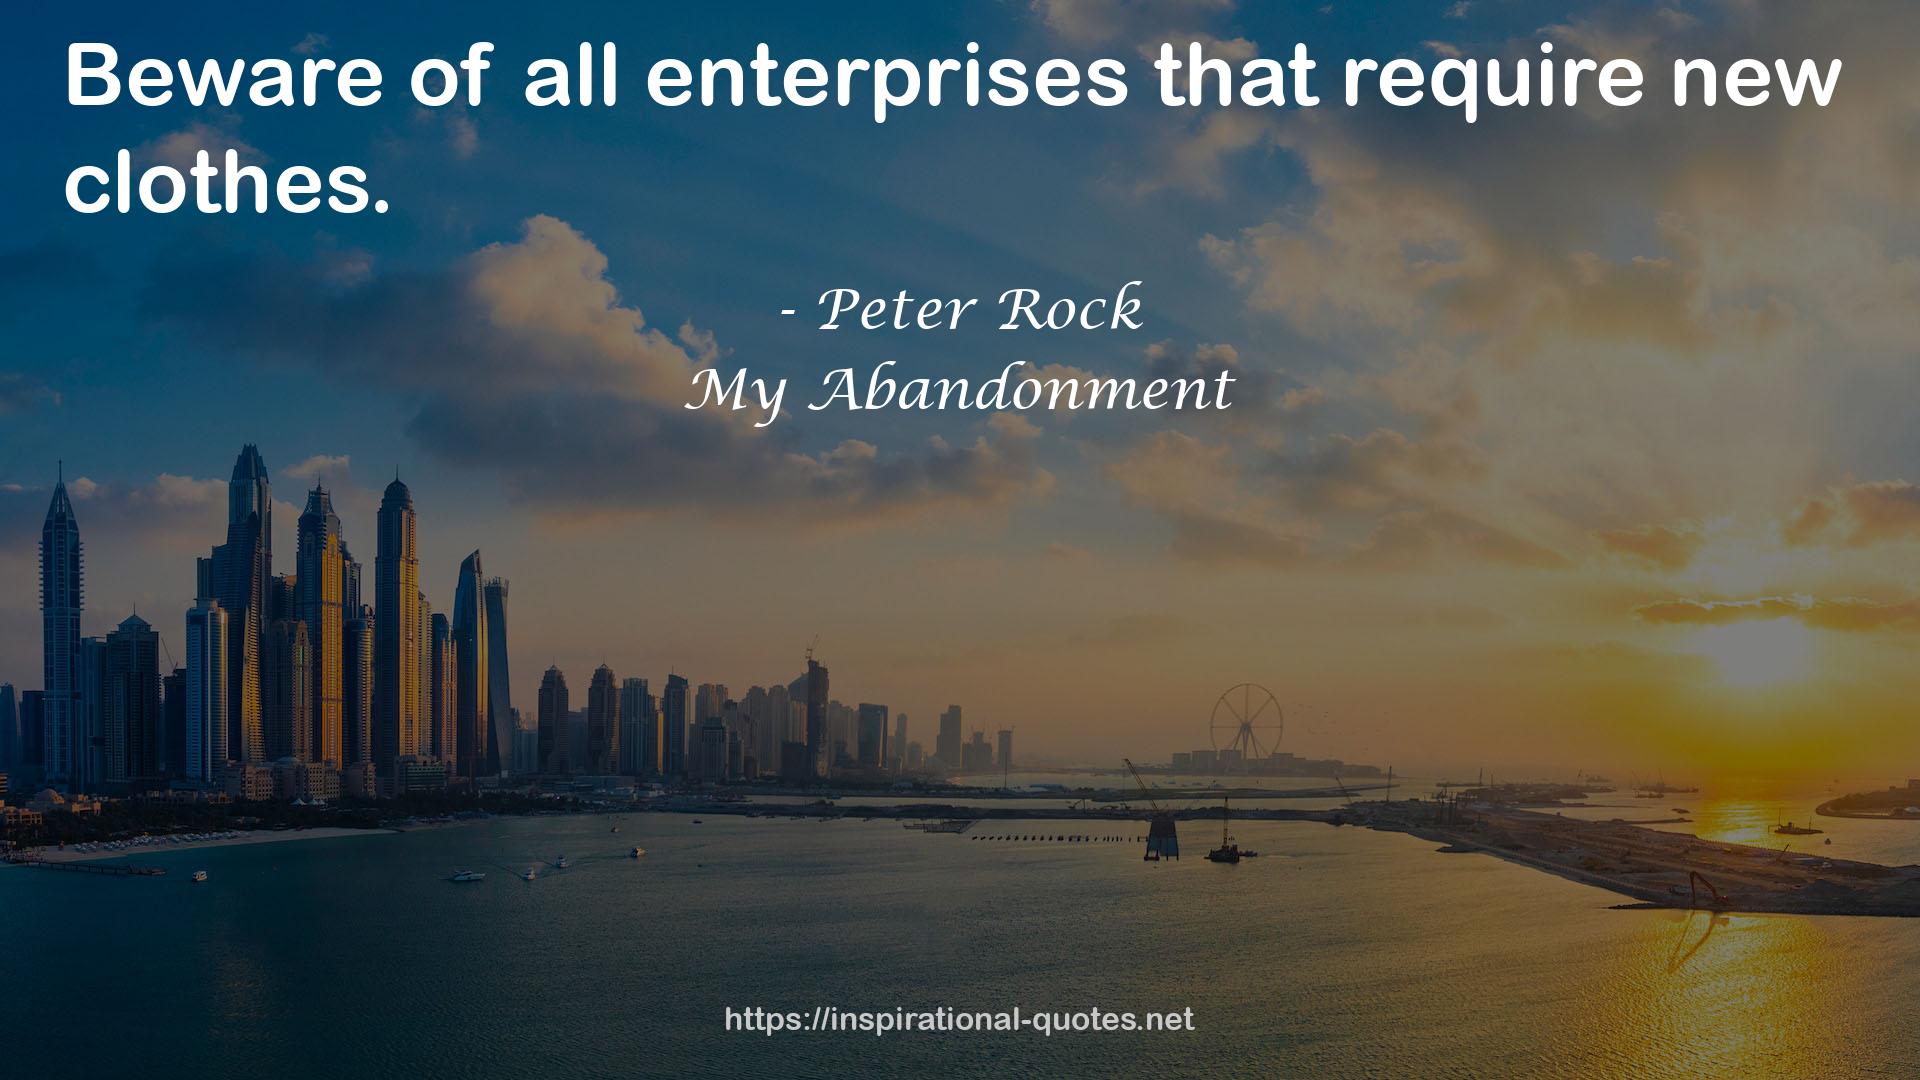 Peter Rock QUOTES